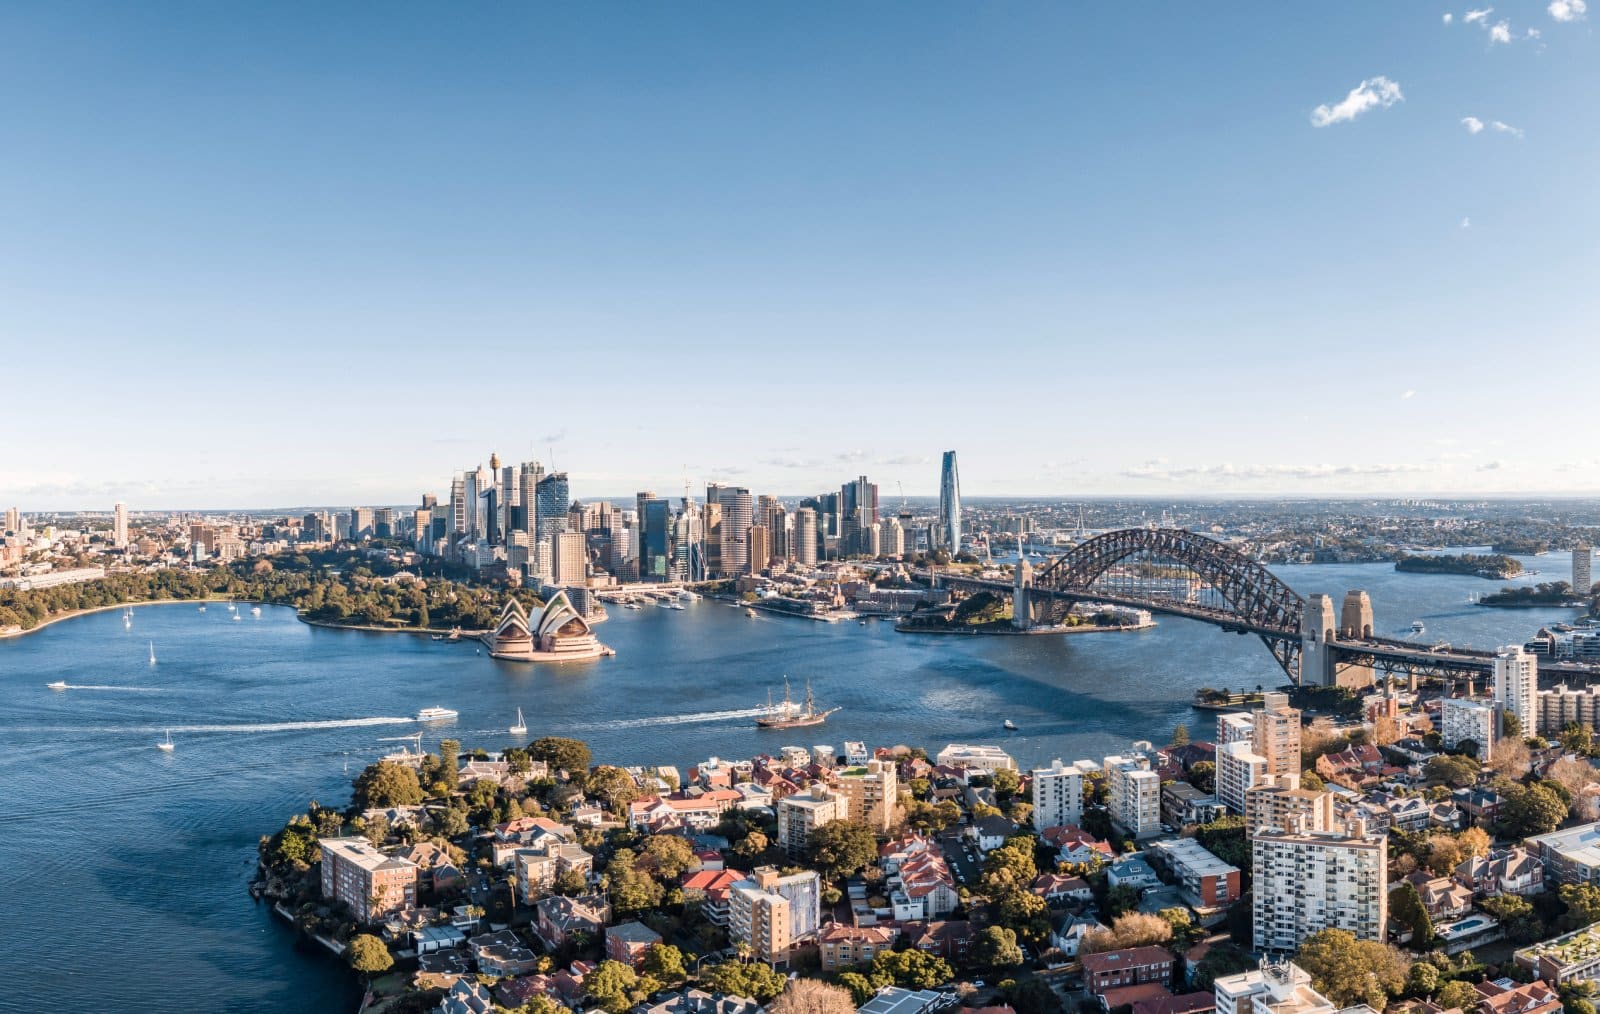 <p class="wp-caption-text">Image Credit: Shutterstock / Juergen_Wallstabe</p>  <p>Australians in cities like Sydney and Melbourne find the loud, space-filling nature of American tourists to be a bit much, clashing with the laid-back Aussie vibe.</p>